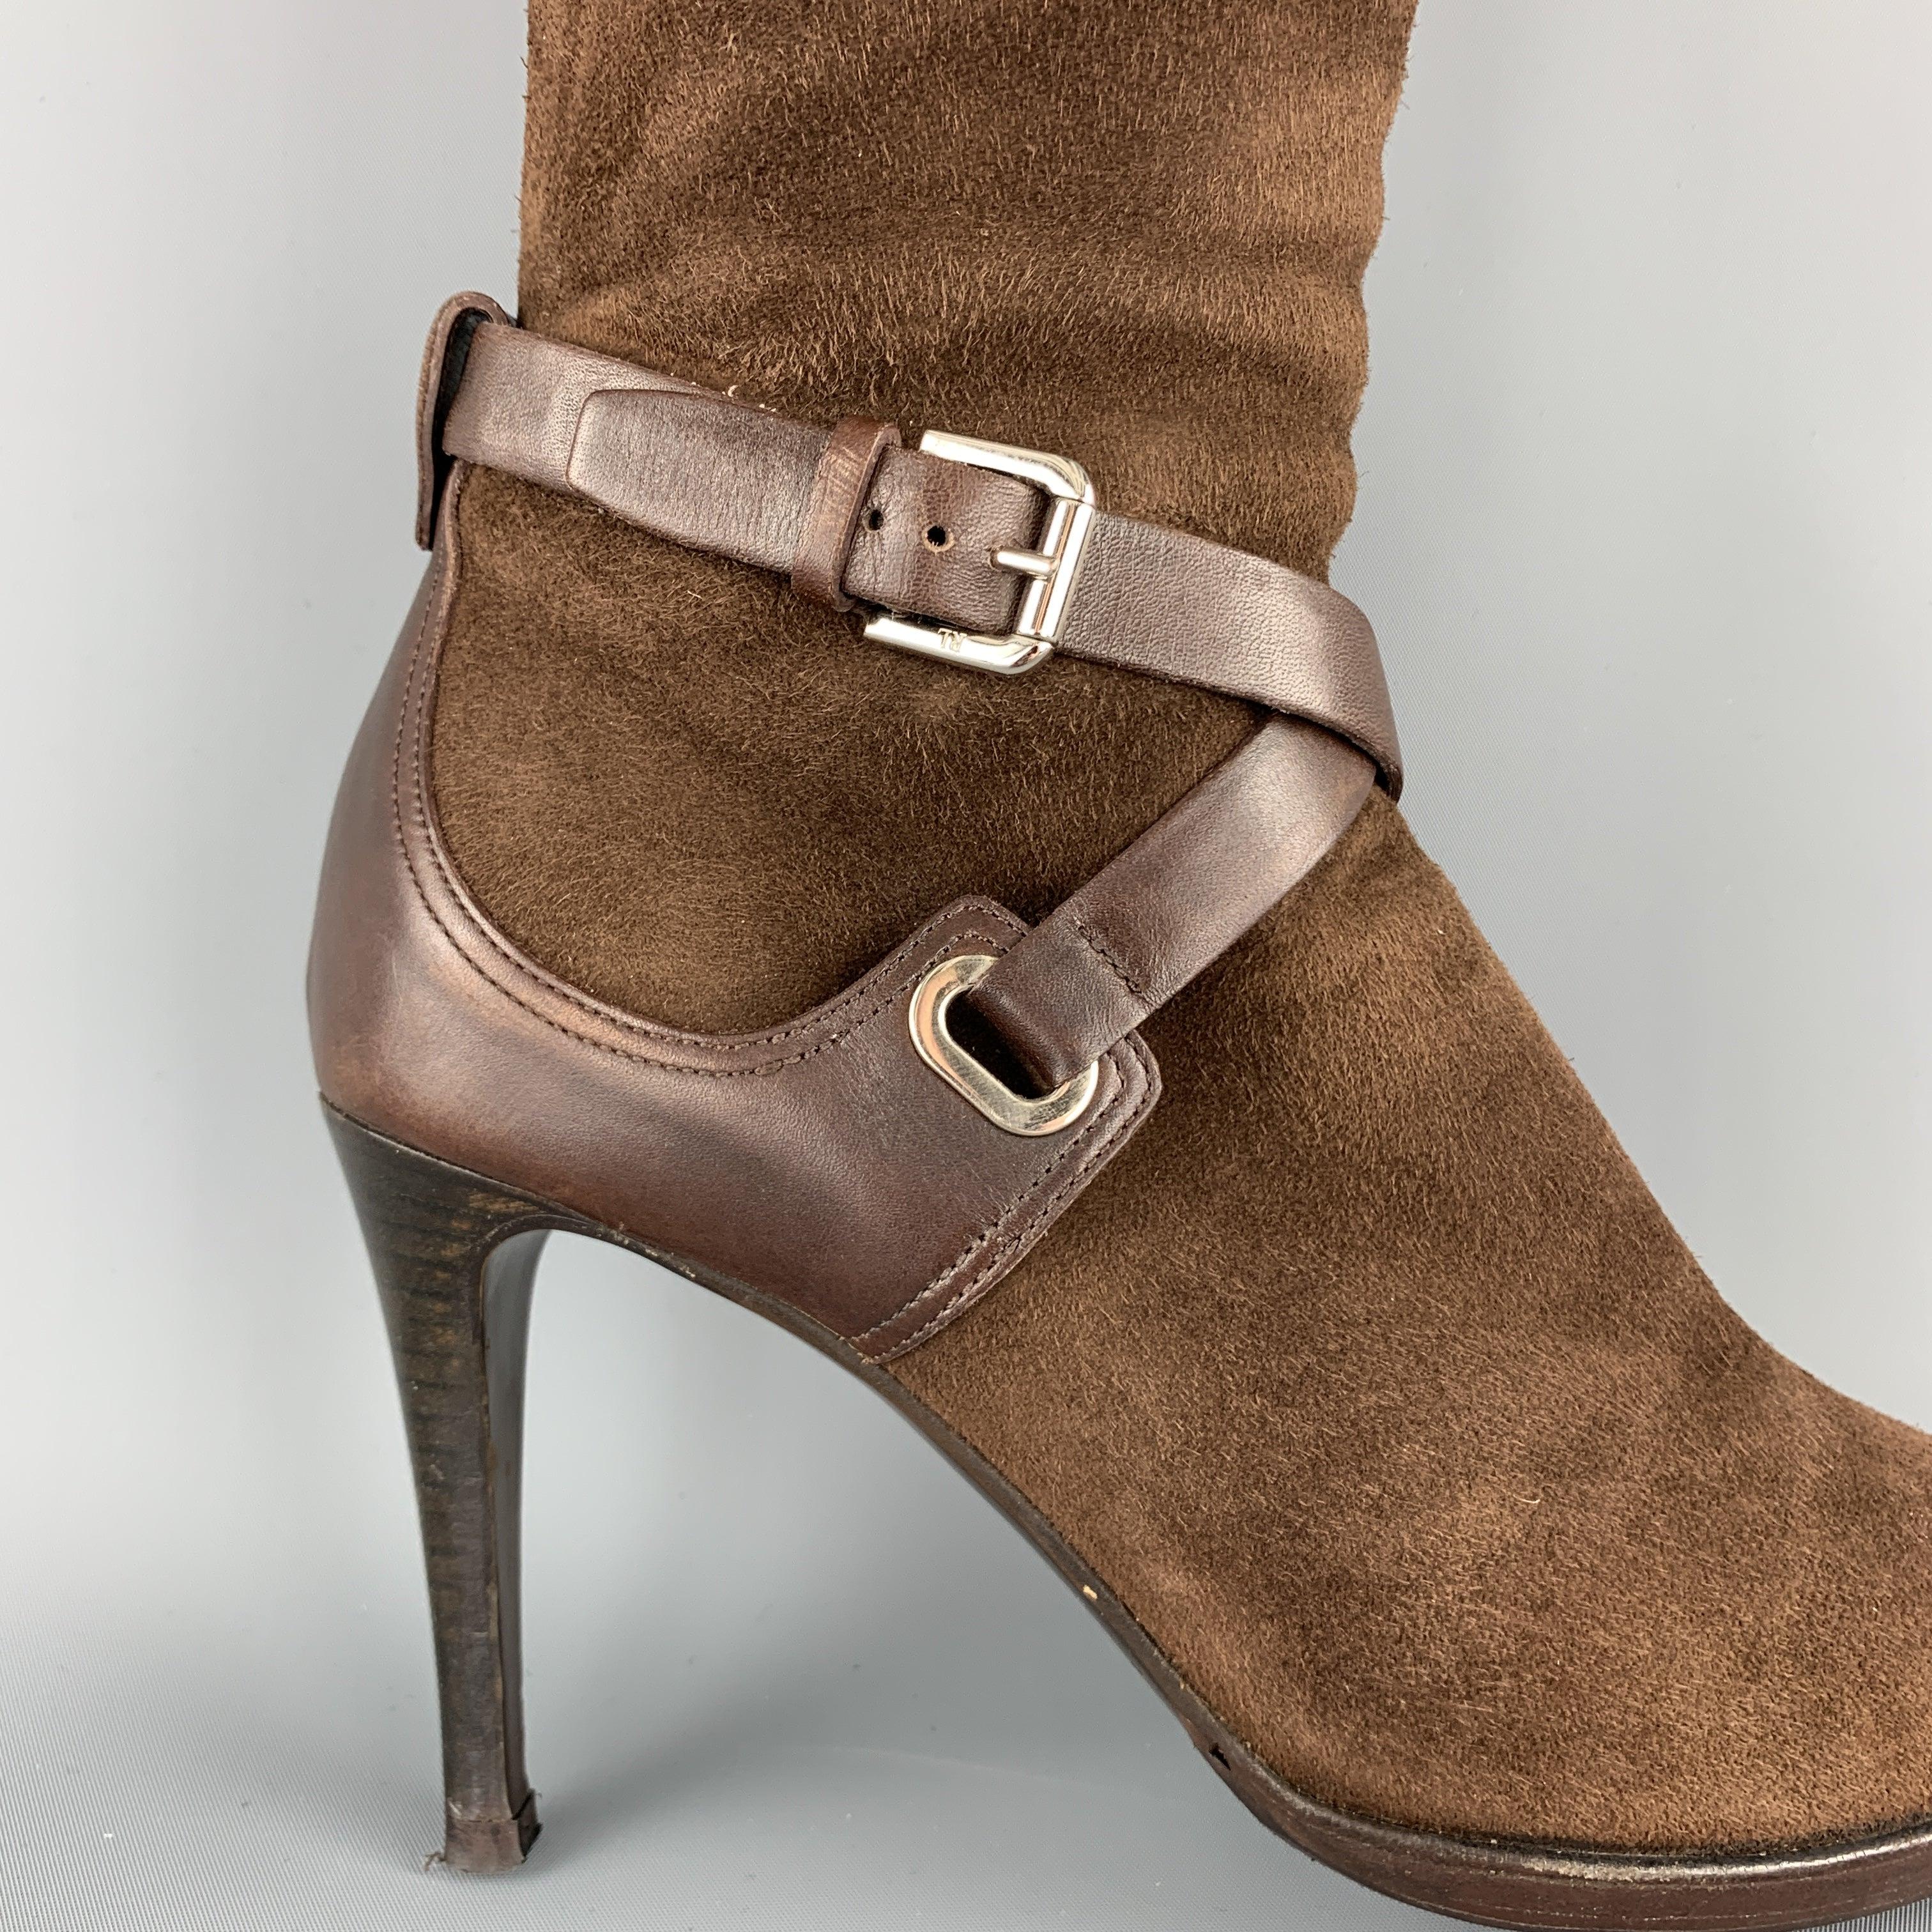 RALPH LAUREN boots come in brown suede with a pointed toe, stiletto heel, knee high shaft, and leather ankle straps. Made in Italy.Good Pre-Owned Condition. 

Marked:   US 7BHeel: 4.75 inches Length: 15 inches 
  
  
 
Reference: 102377
Category: